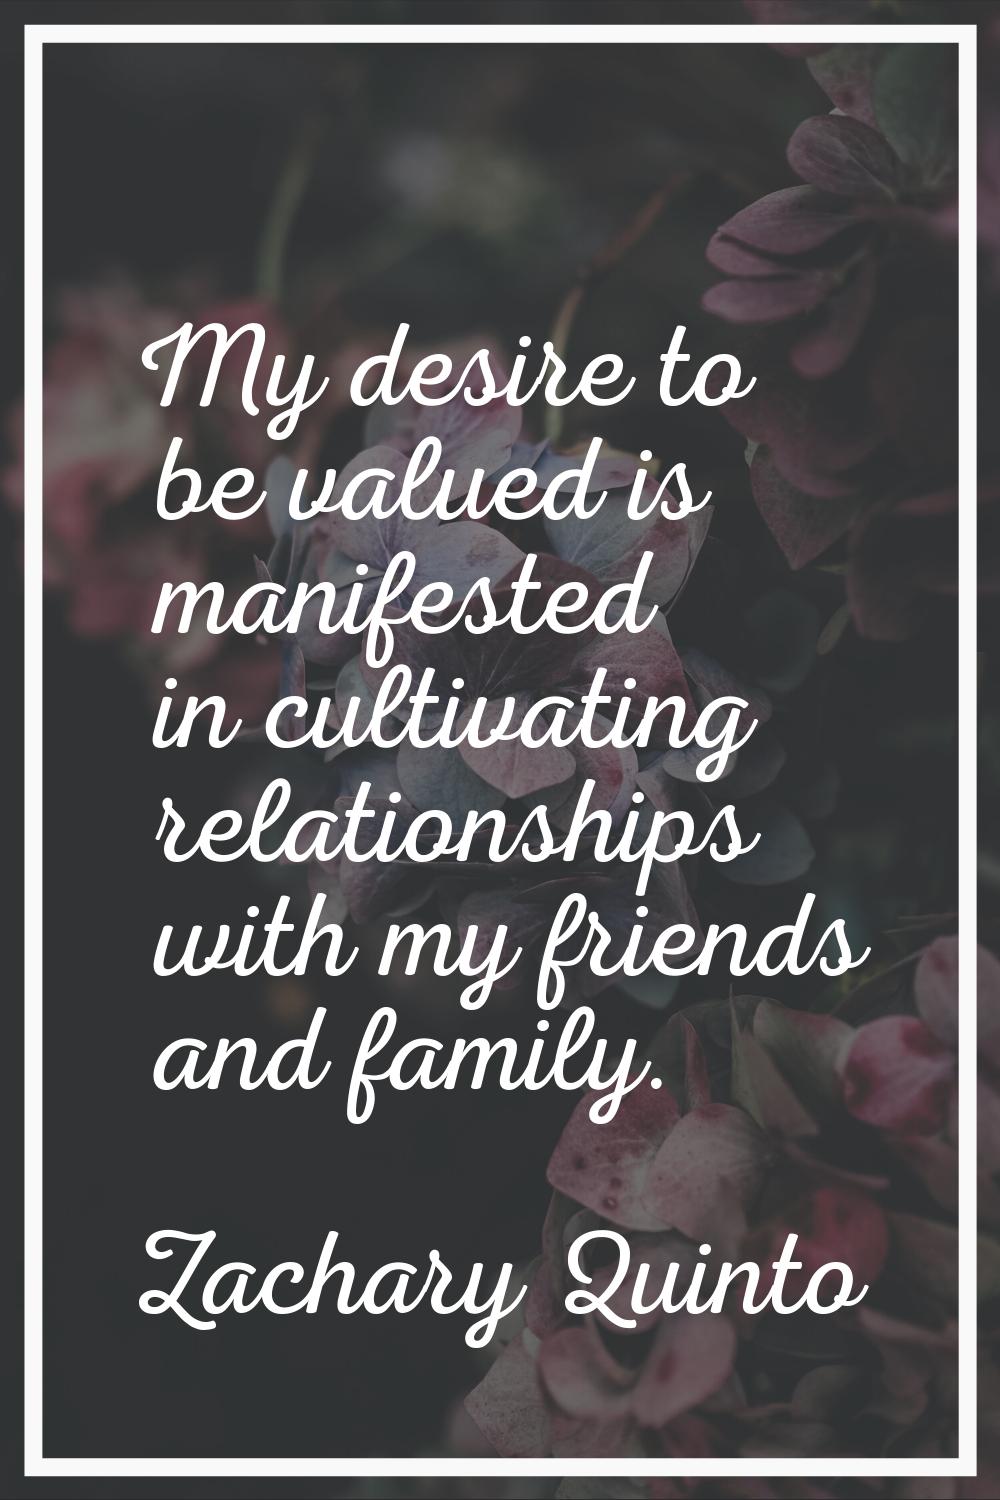 My desire to be valued is manifested in cultivating relationships with my friends and family.